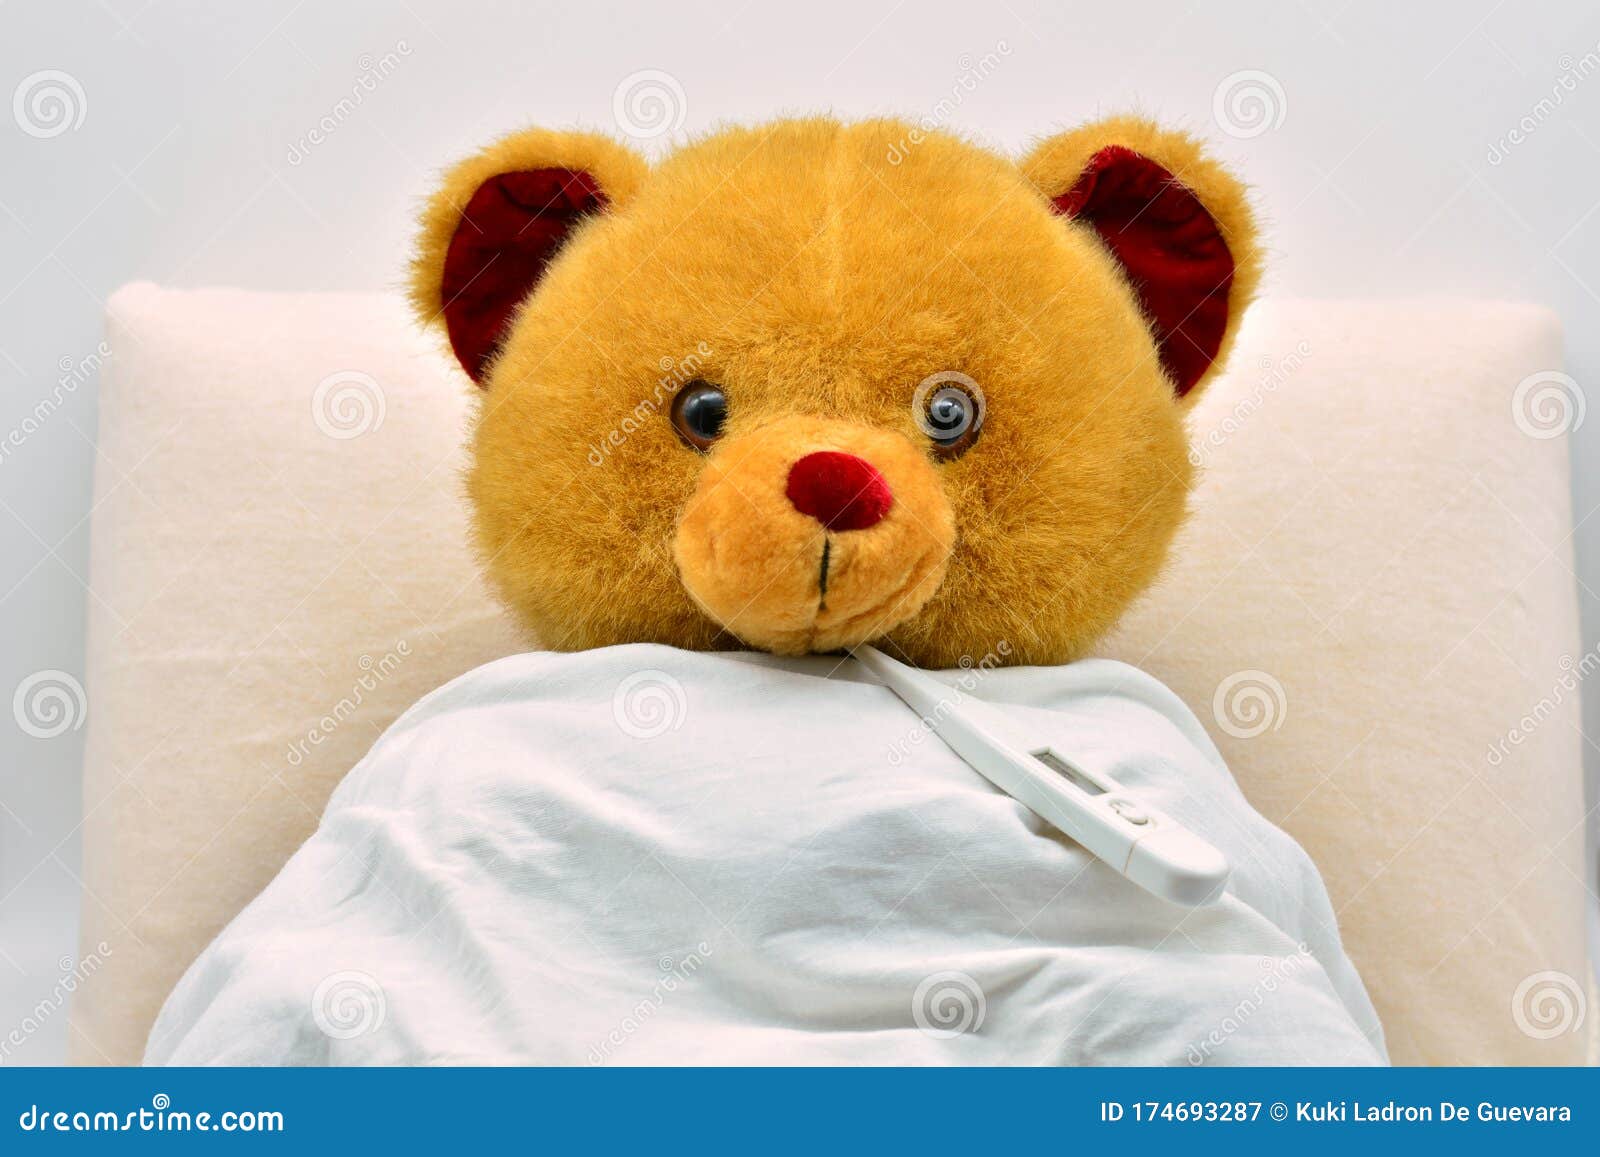 teddy bear in bed, sick with fever